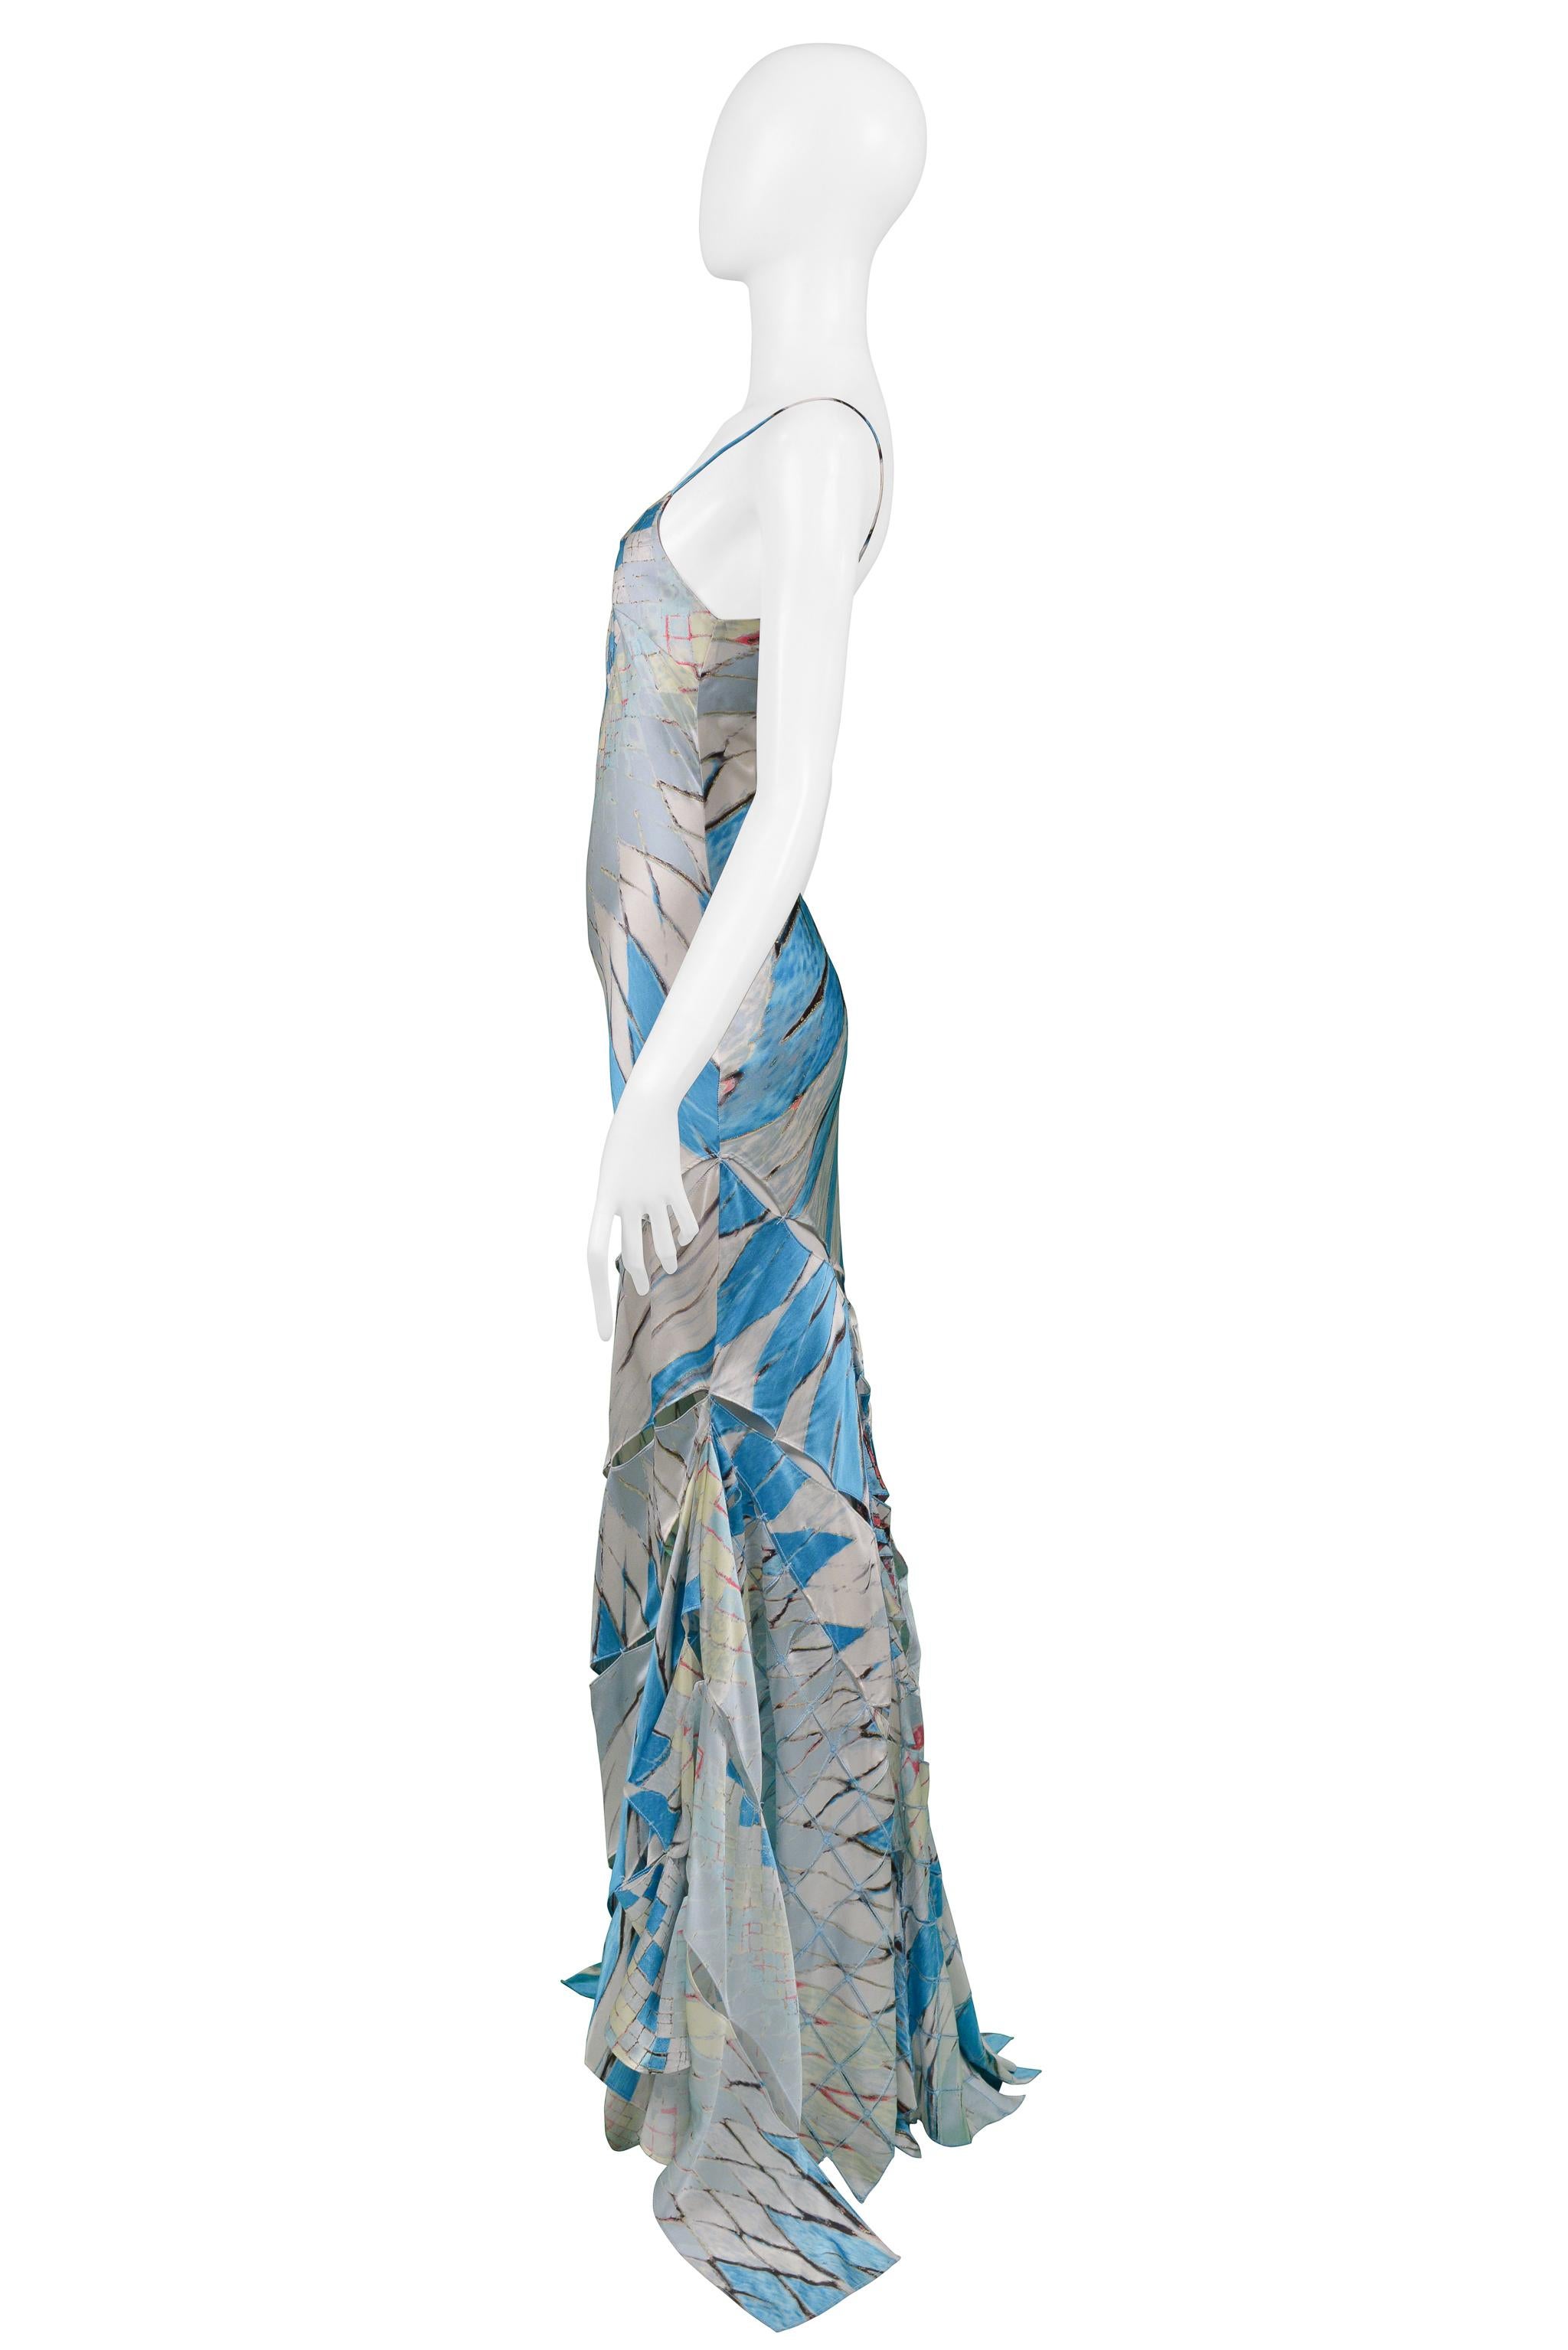 Roberto Cavalli Multicolor Stained Glass Print Gown With Cutout Slashes 2004 For Sale 2